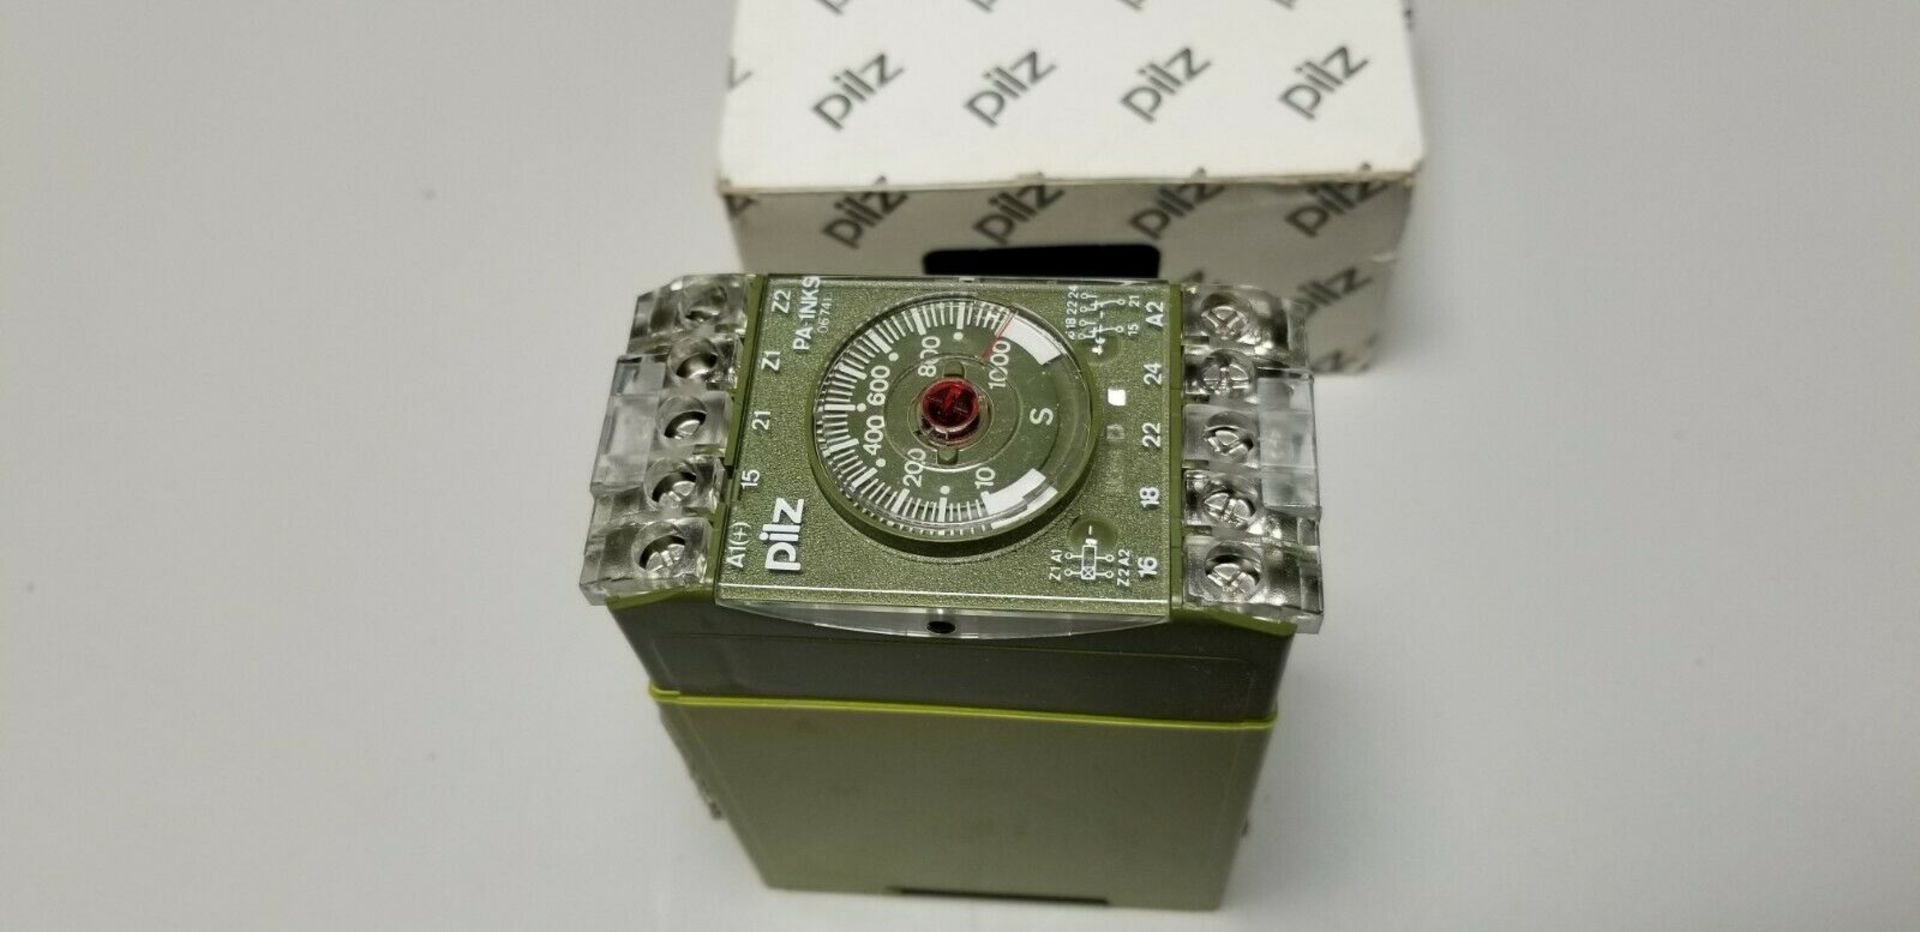 New Pilz Relay Timer - Image 2 of 2